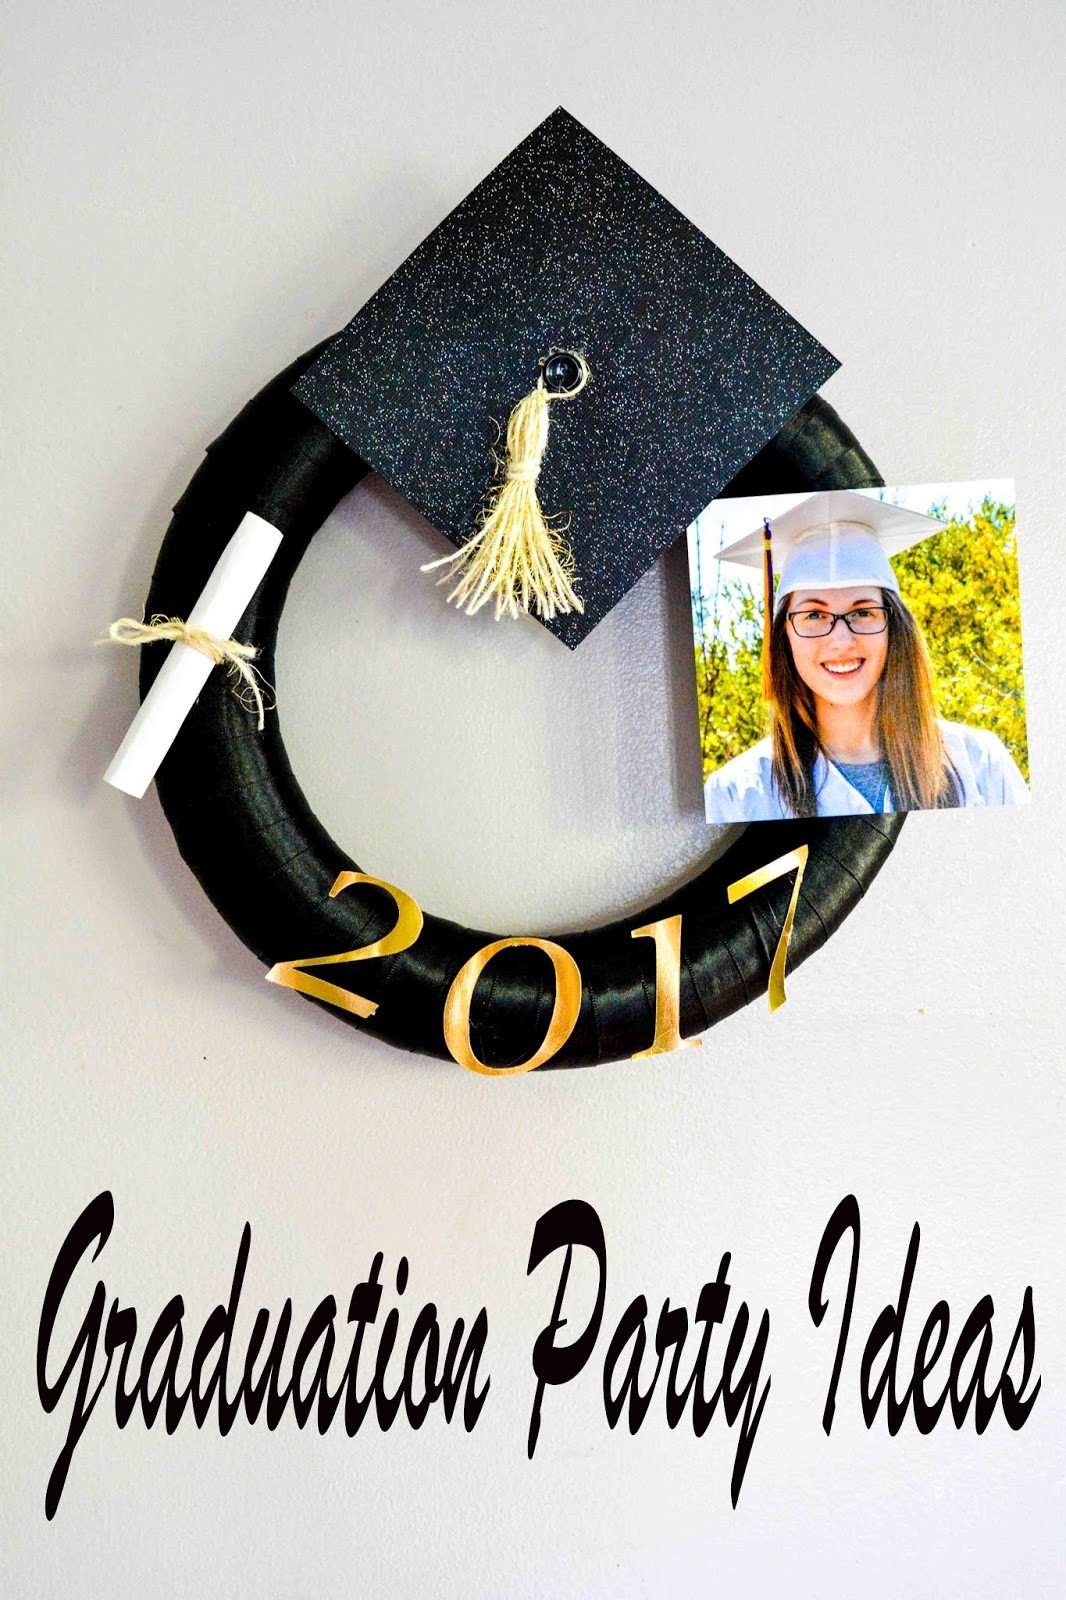 Graduation Party Ideas On A Budget
 Theresa s Mixed Nuts Inexpensive Graduation Party Ideas